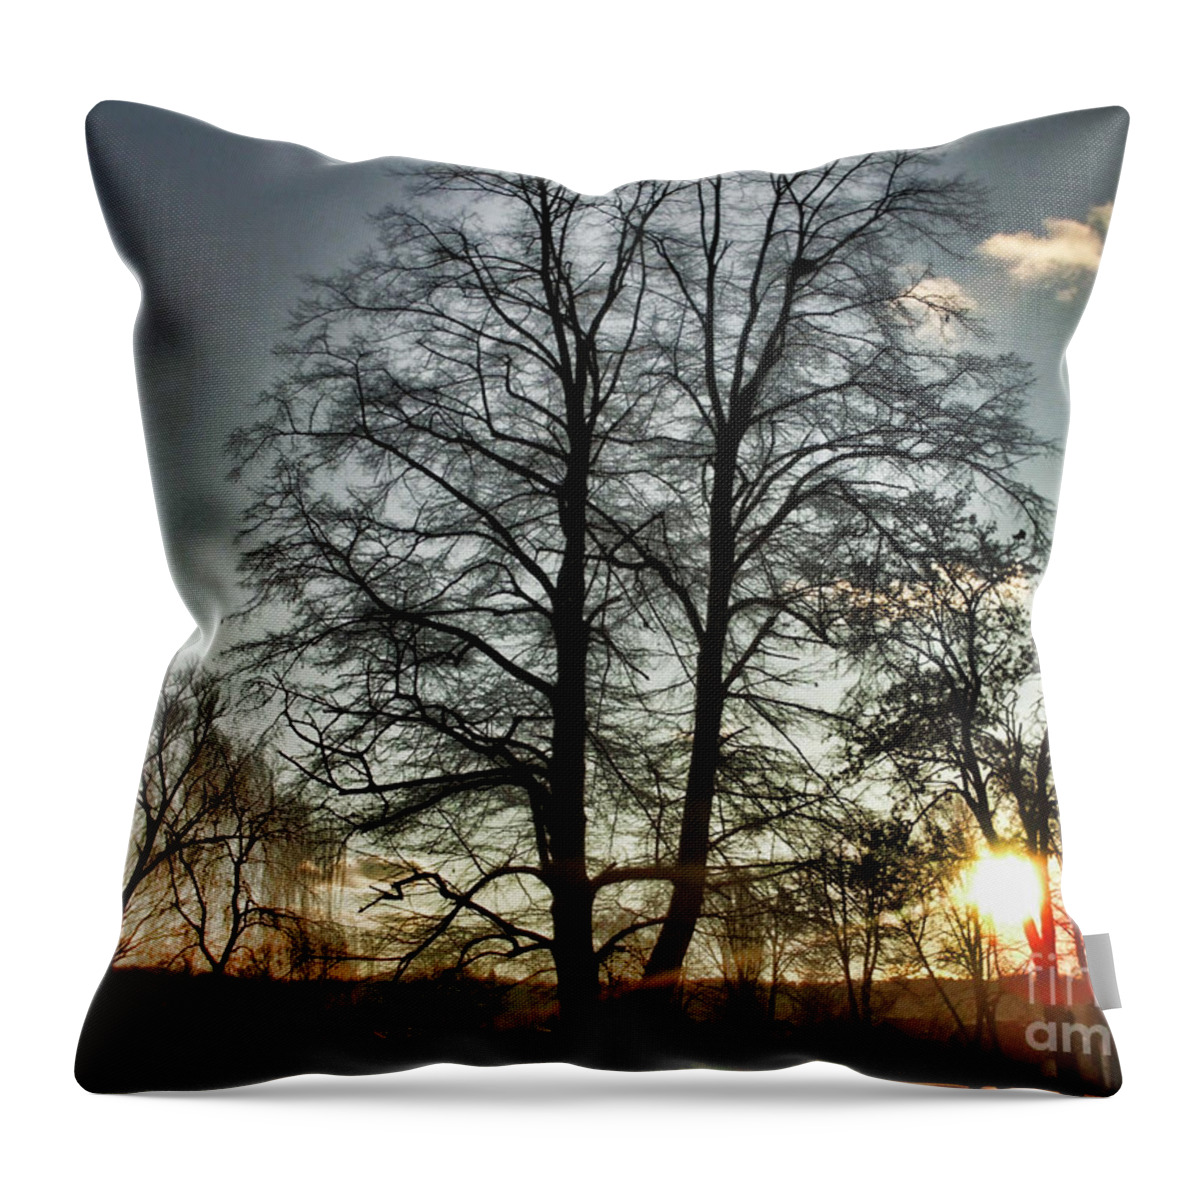 Tree Of Light Throw Pillow featuring the photograph Tree Of Light by Nina Ficur Feenan